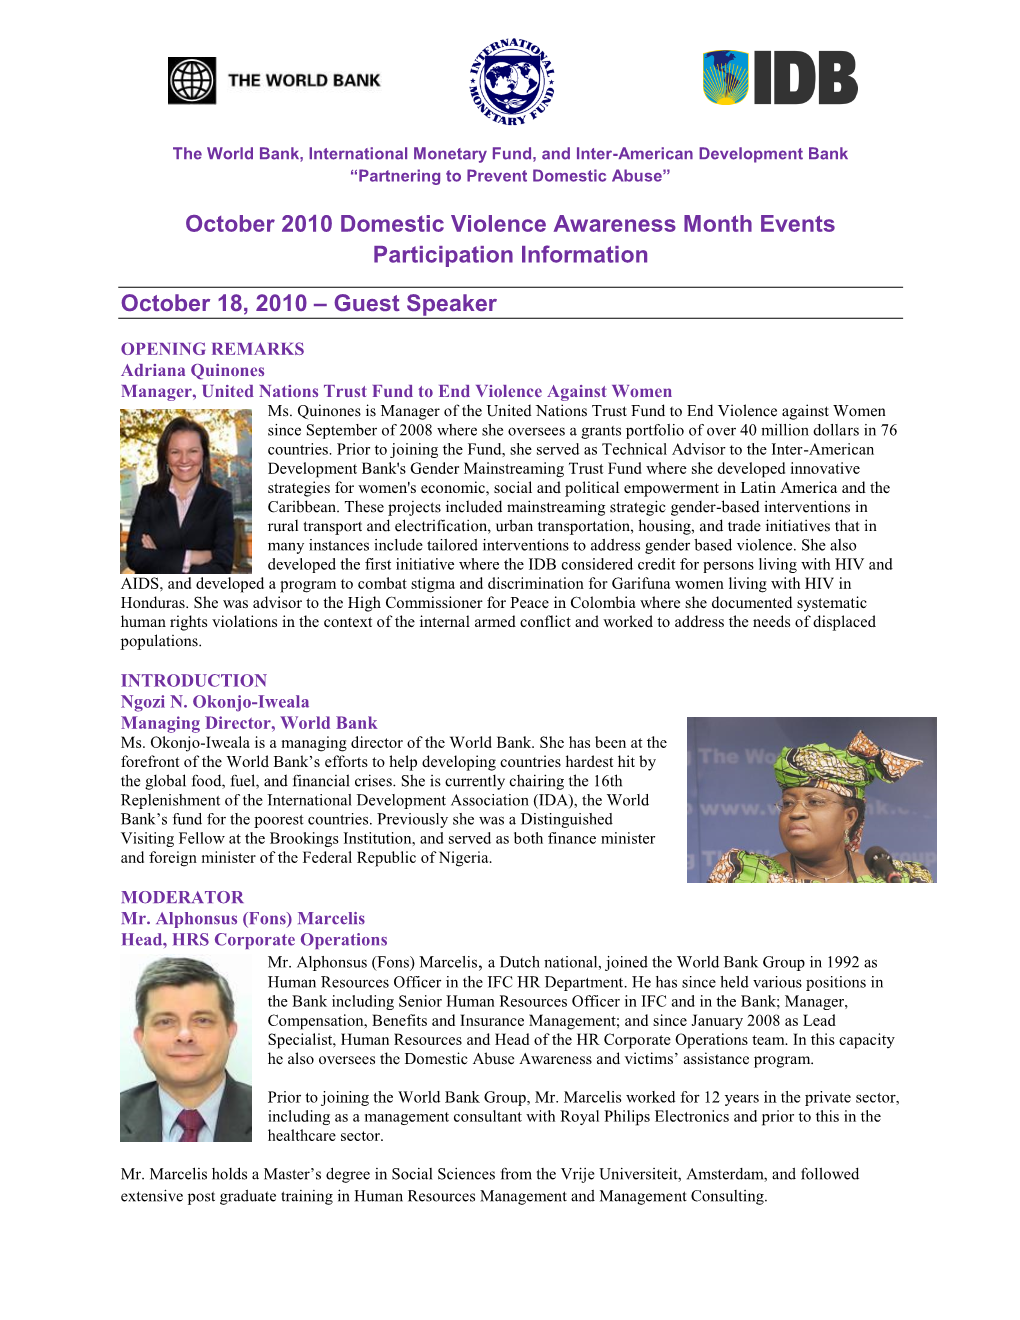 October 2010 Domestic Violence Awareness Month Events Participation Information